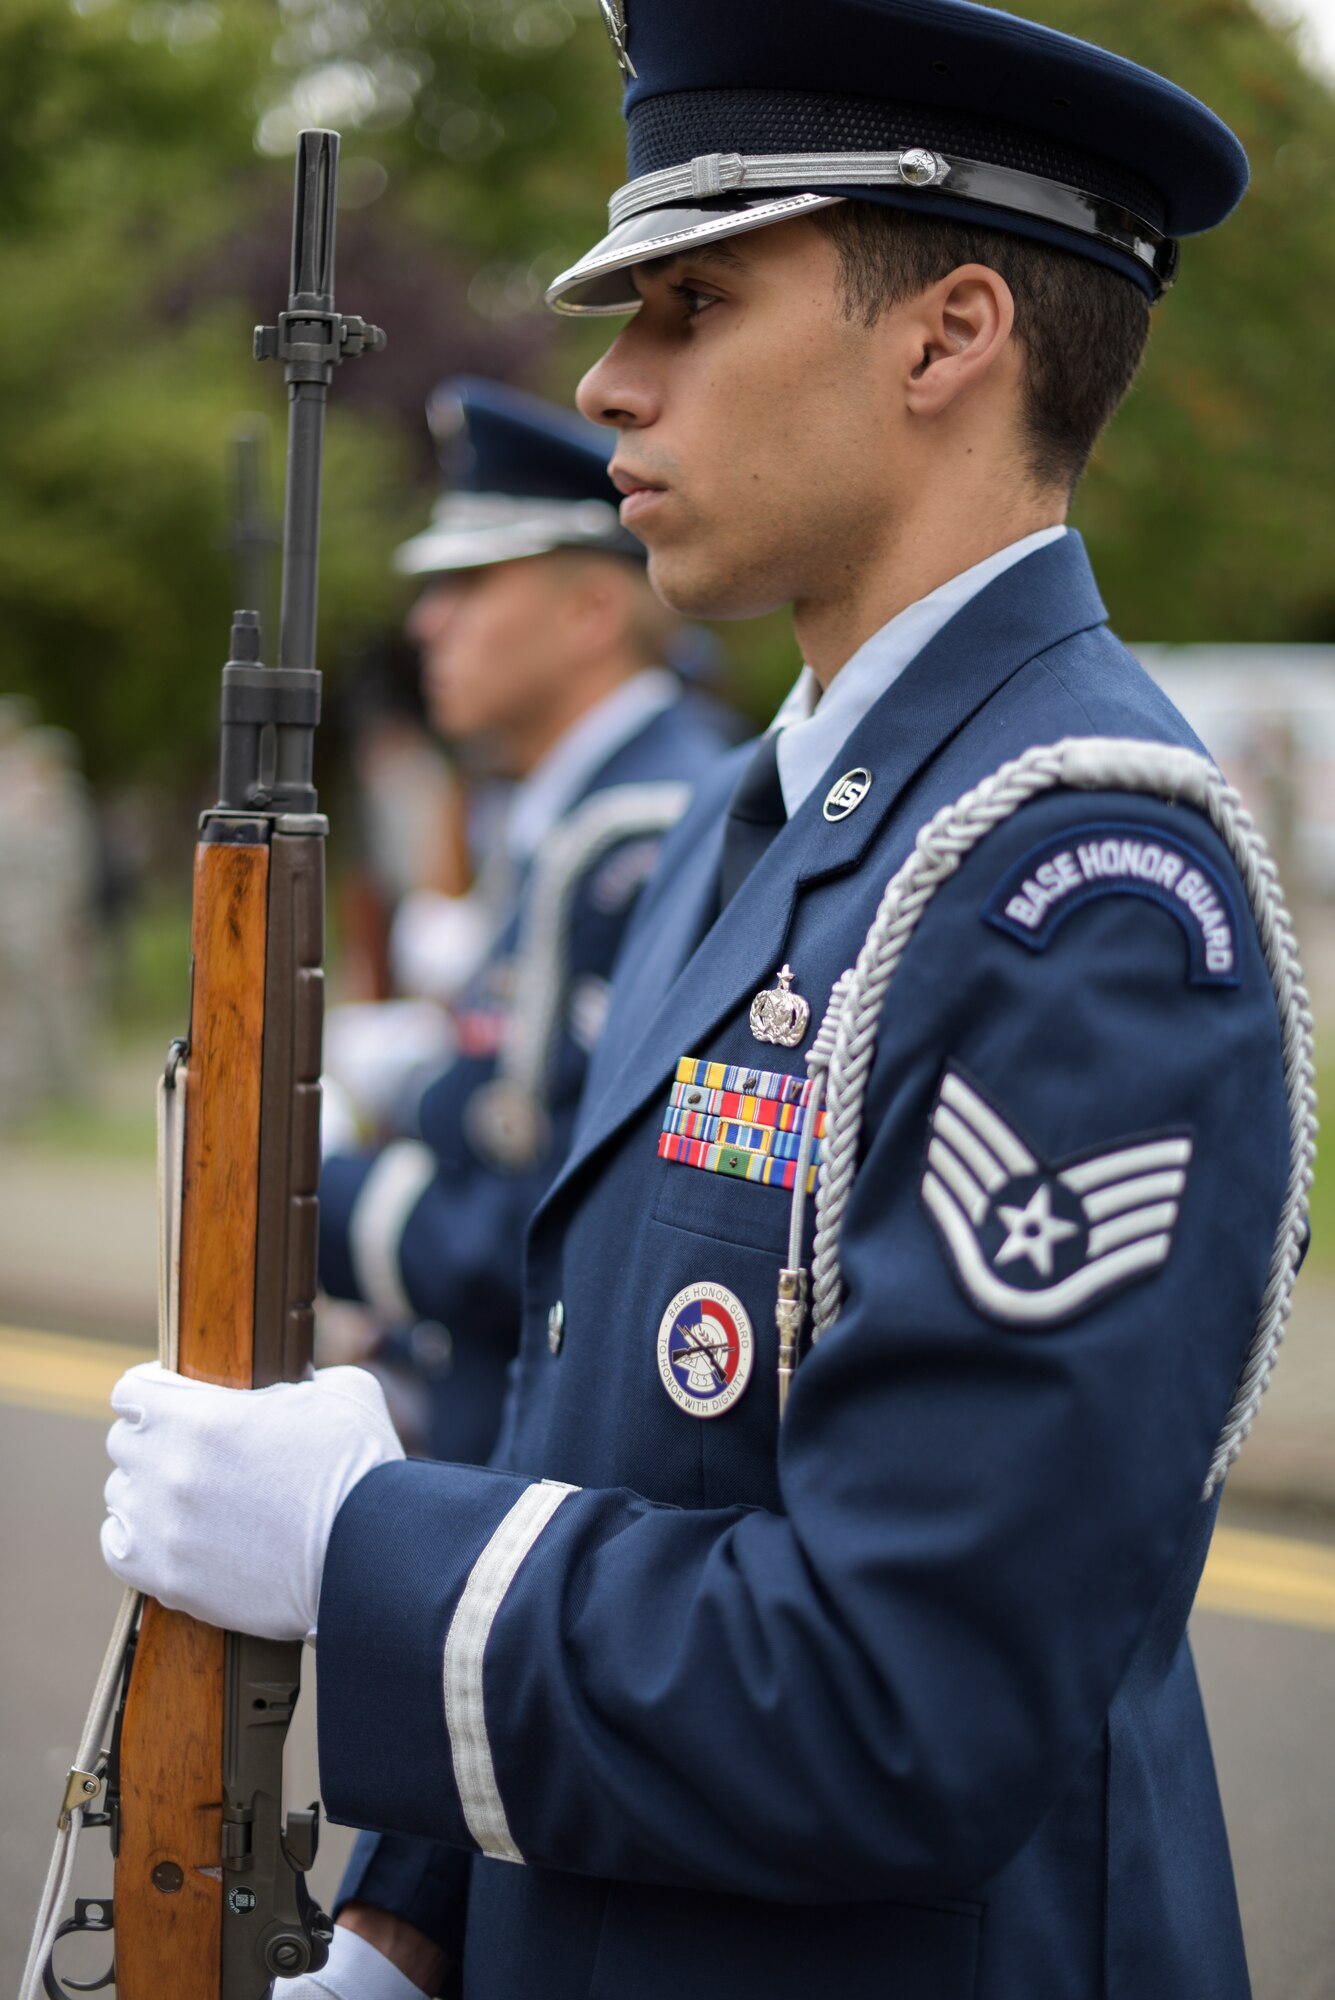 The Team Mildenhall Honor Guard stands by during a 9/11 ceremony at RAF Mildenhall Sep. 11, 2018. Though honor guard details are priority, Team Mildenhall honor guard members must remain current and progress in their career fields. (U.S. Air Force photo by Tech. Sgt. Emerson Nuñez)